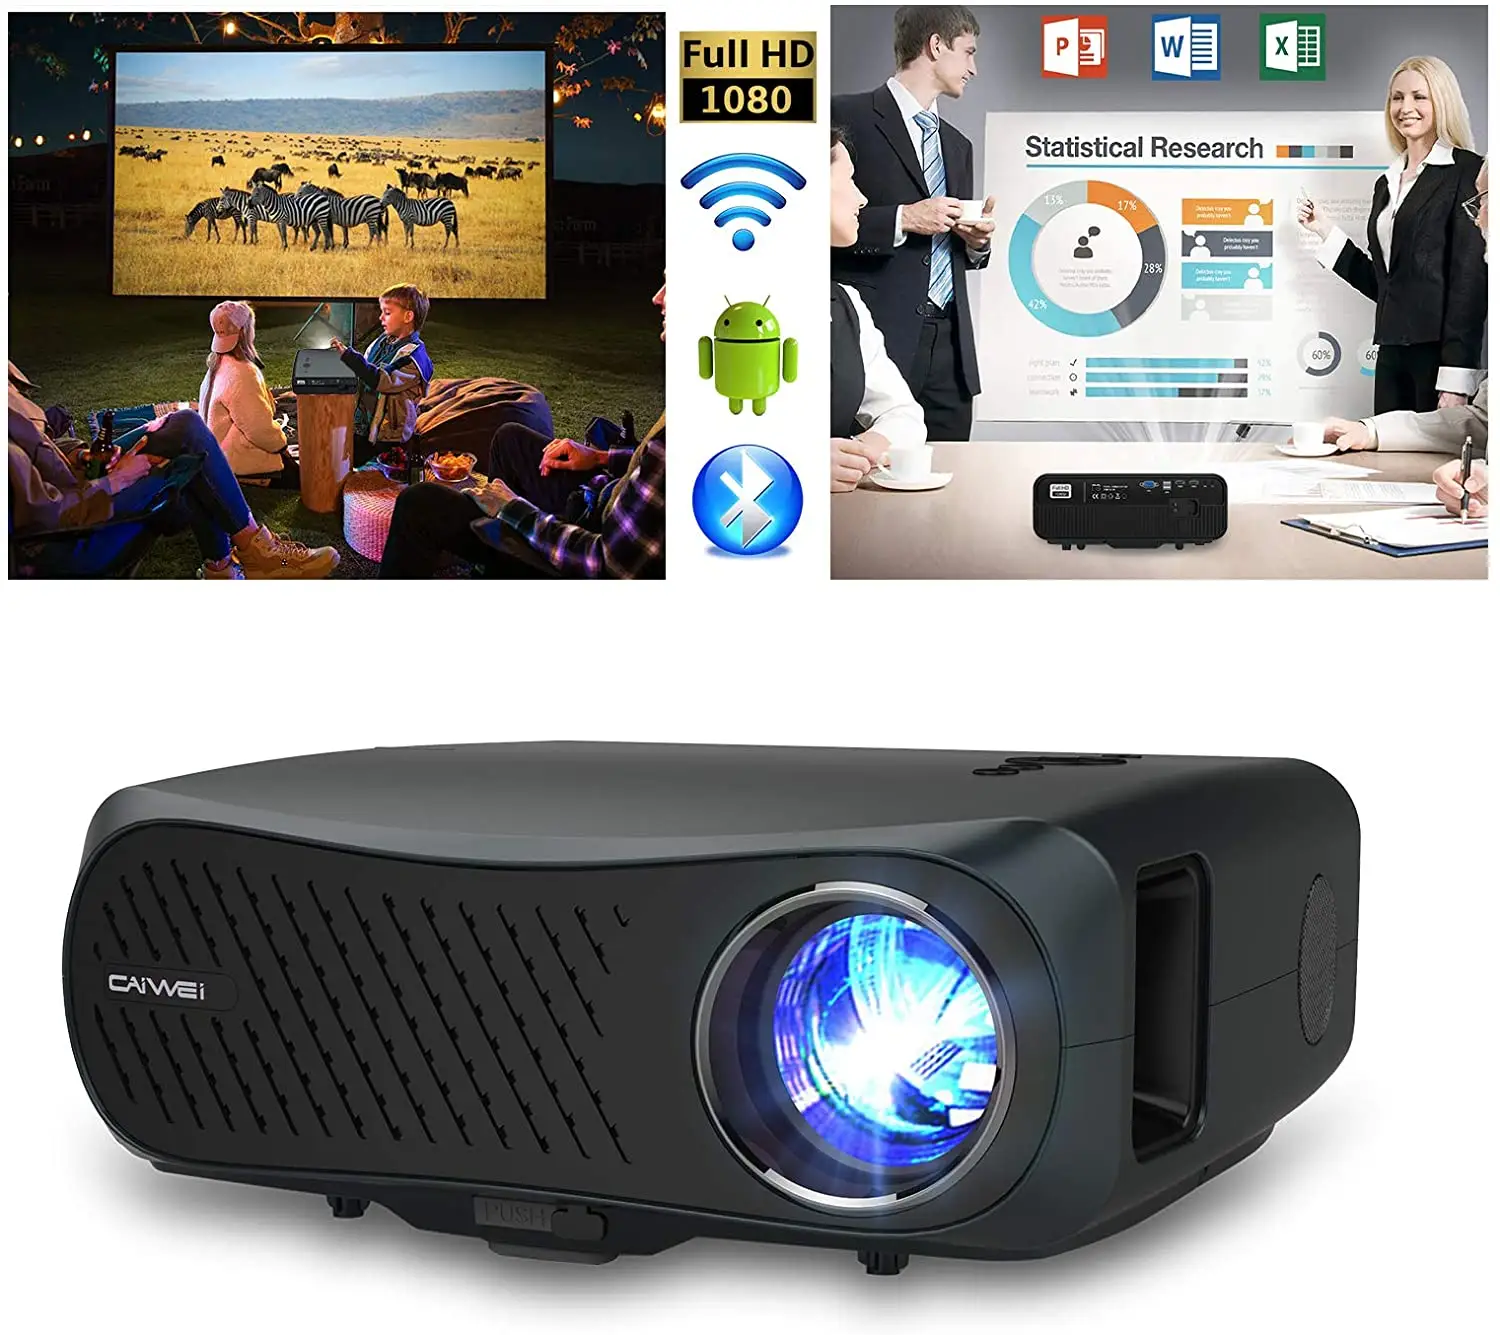 1080P Native Video Projector WiFi Blue tooth Full HD Support 4K Home Theater Projectors Wireless Sync with iPhone